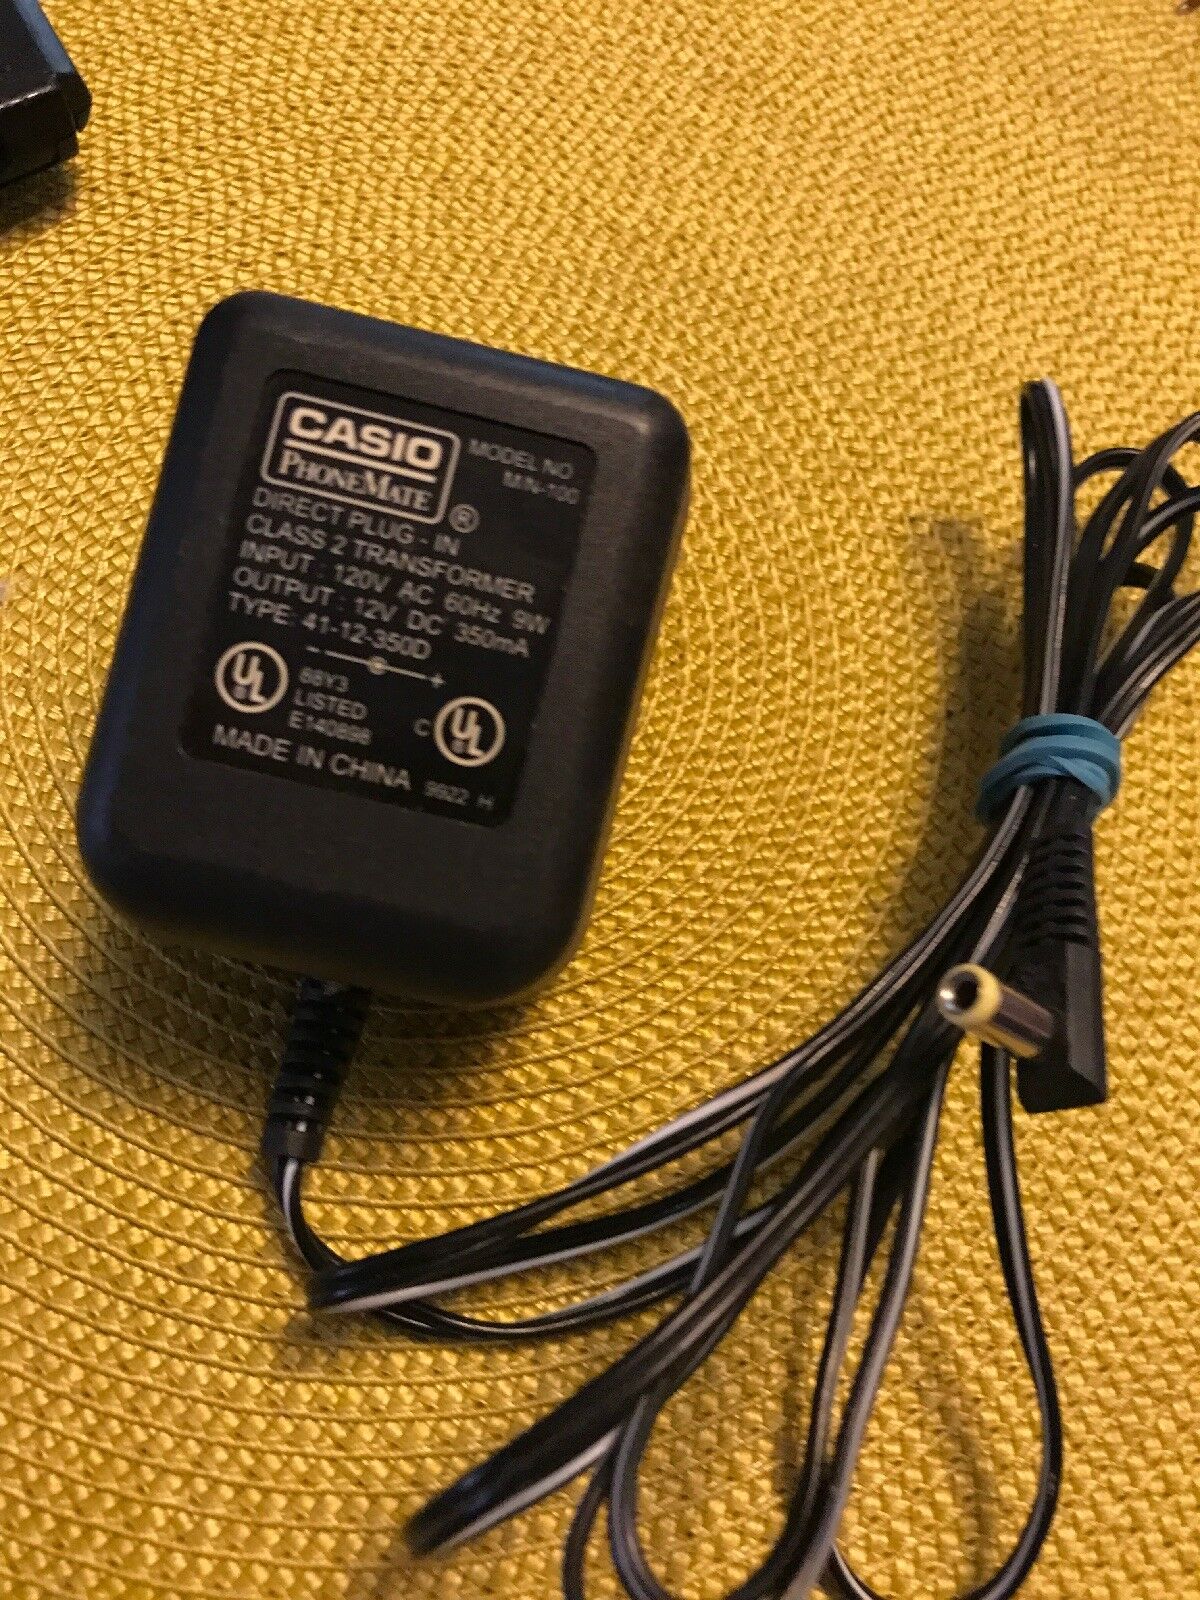 Casio PhoneMate AC Power Supply Adapter M/N-100 12V DC Tested Model: M/N-90 Output Voltage: 12V Type: Power Supply A